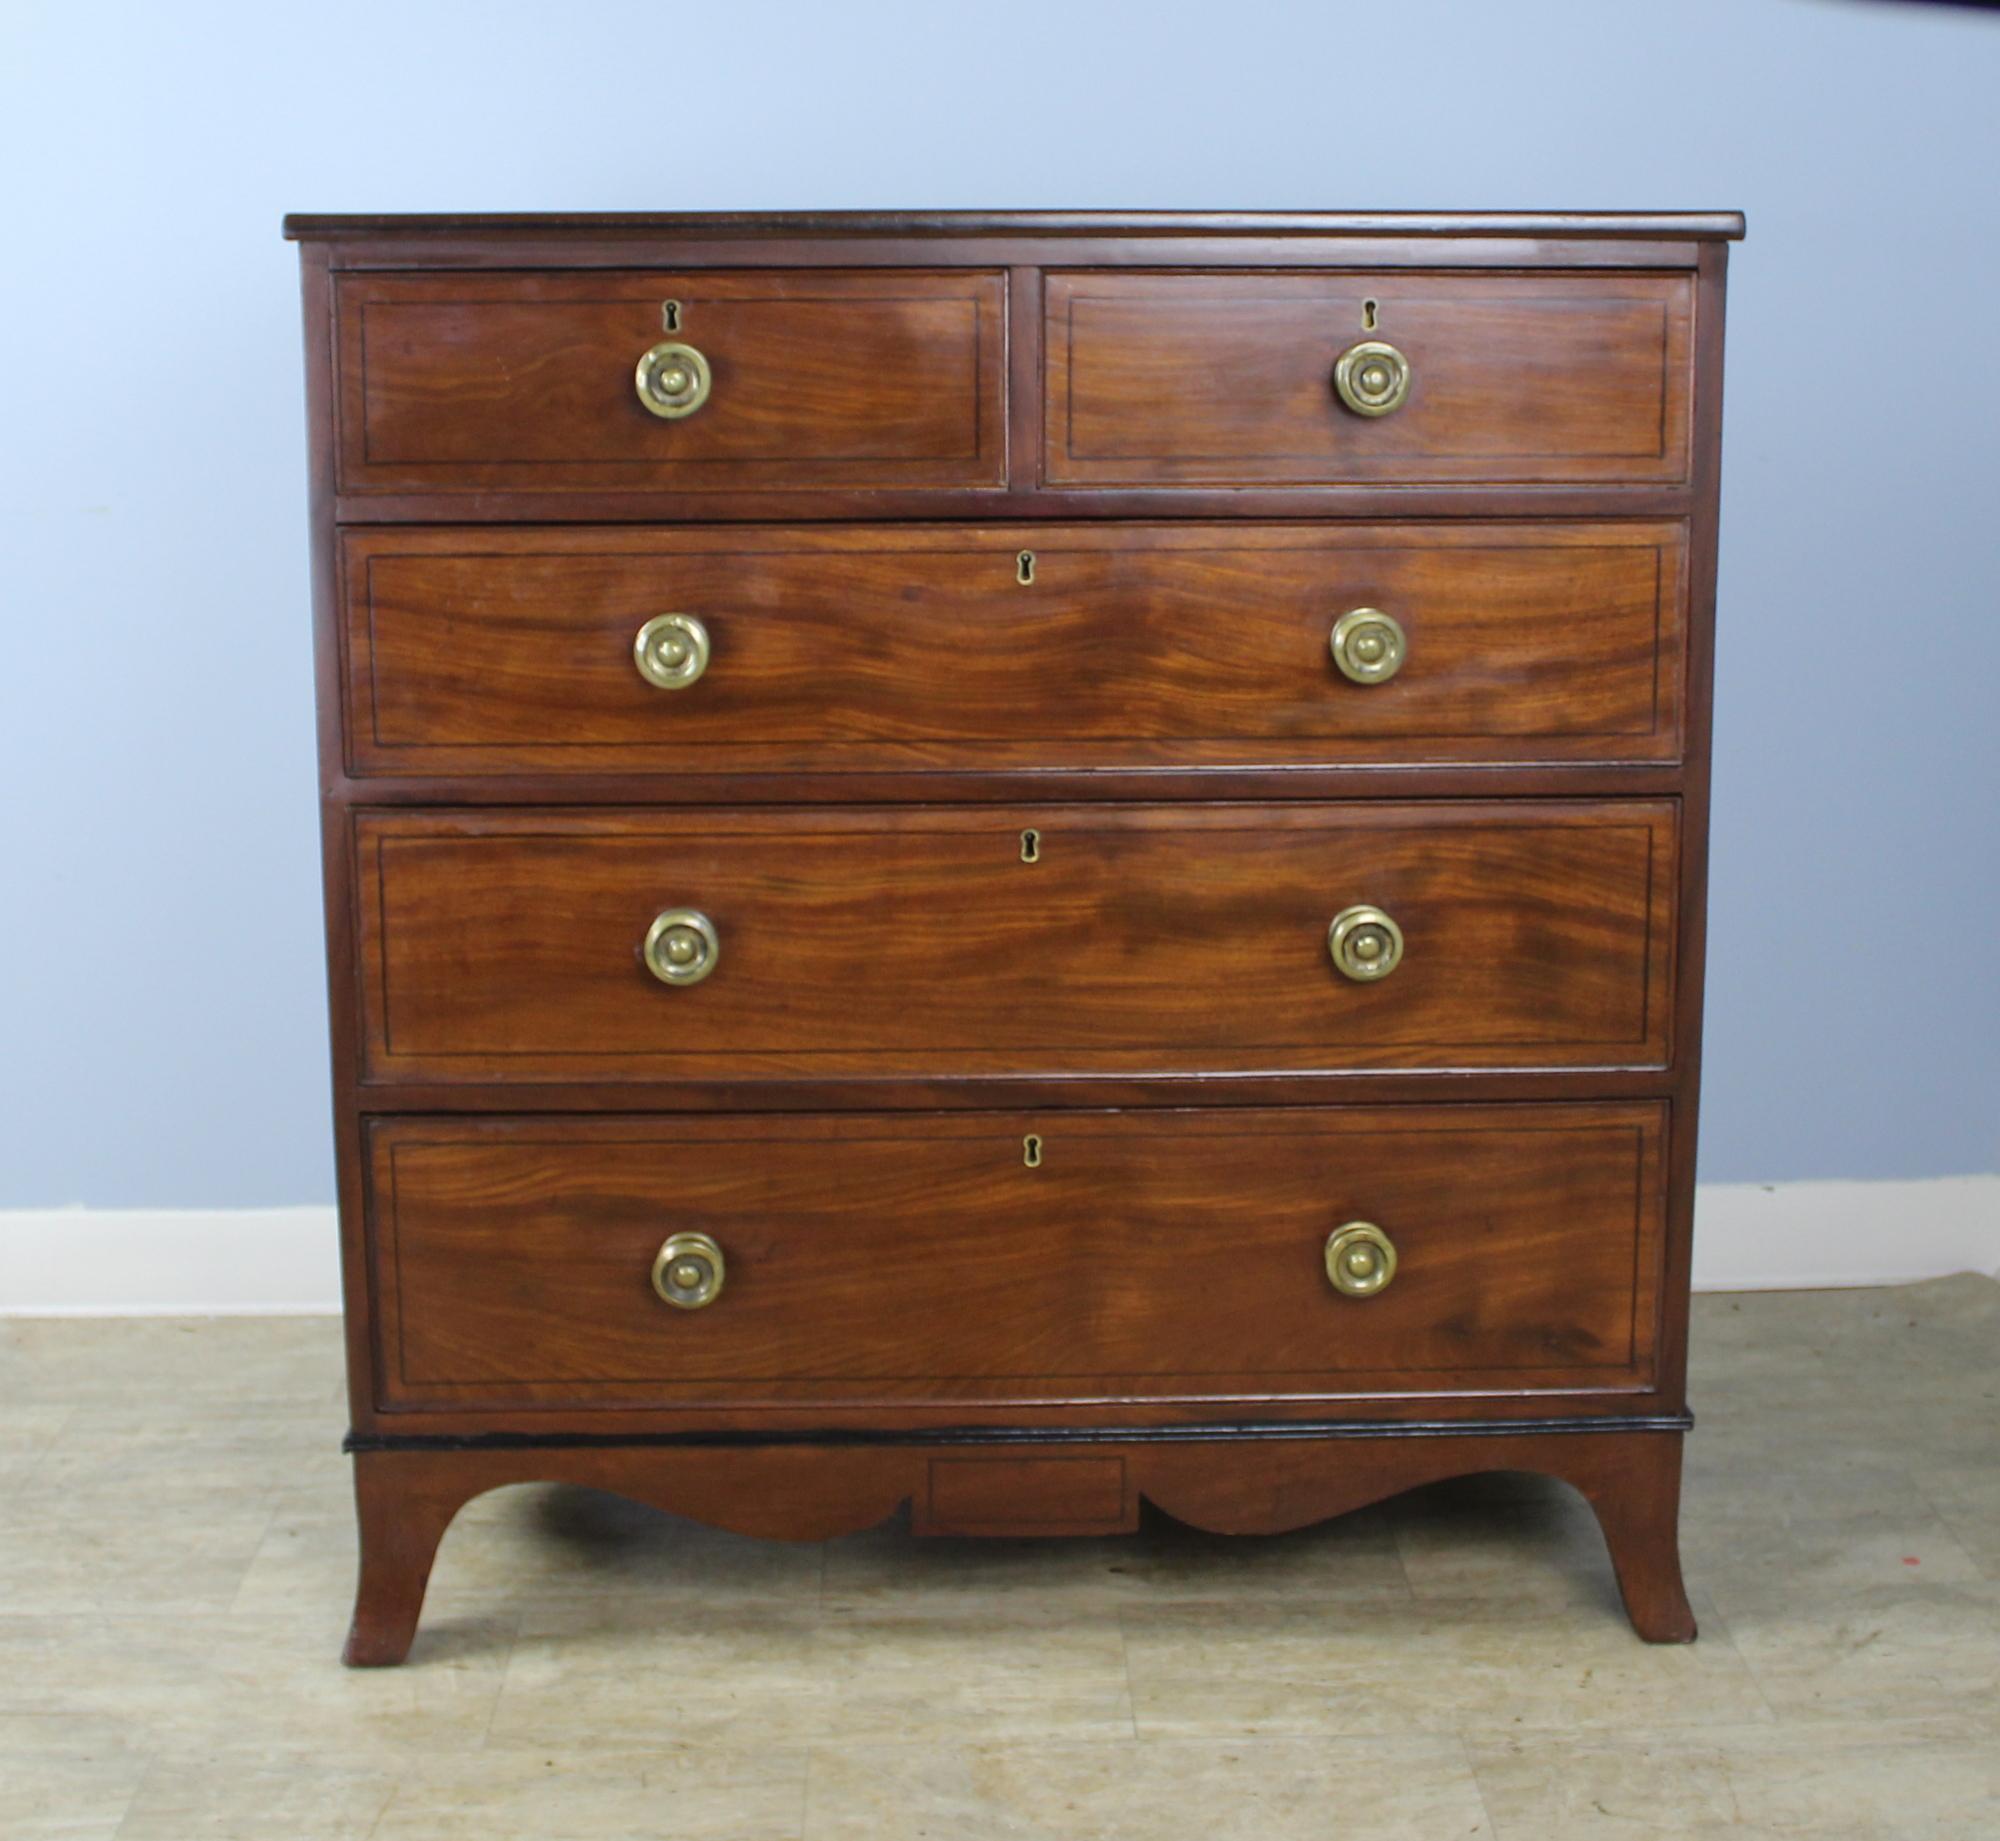 An elegant mahogany bureau in very good antique condition. The mahogany is a rich medium color with a lovely grain. Details of note include the decorative ebony stringing, discreet mouldings on the drawers, and beautifully wrought brass drawer